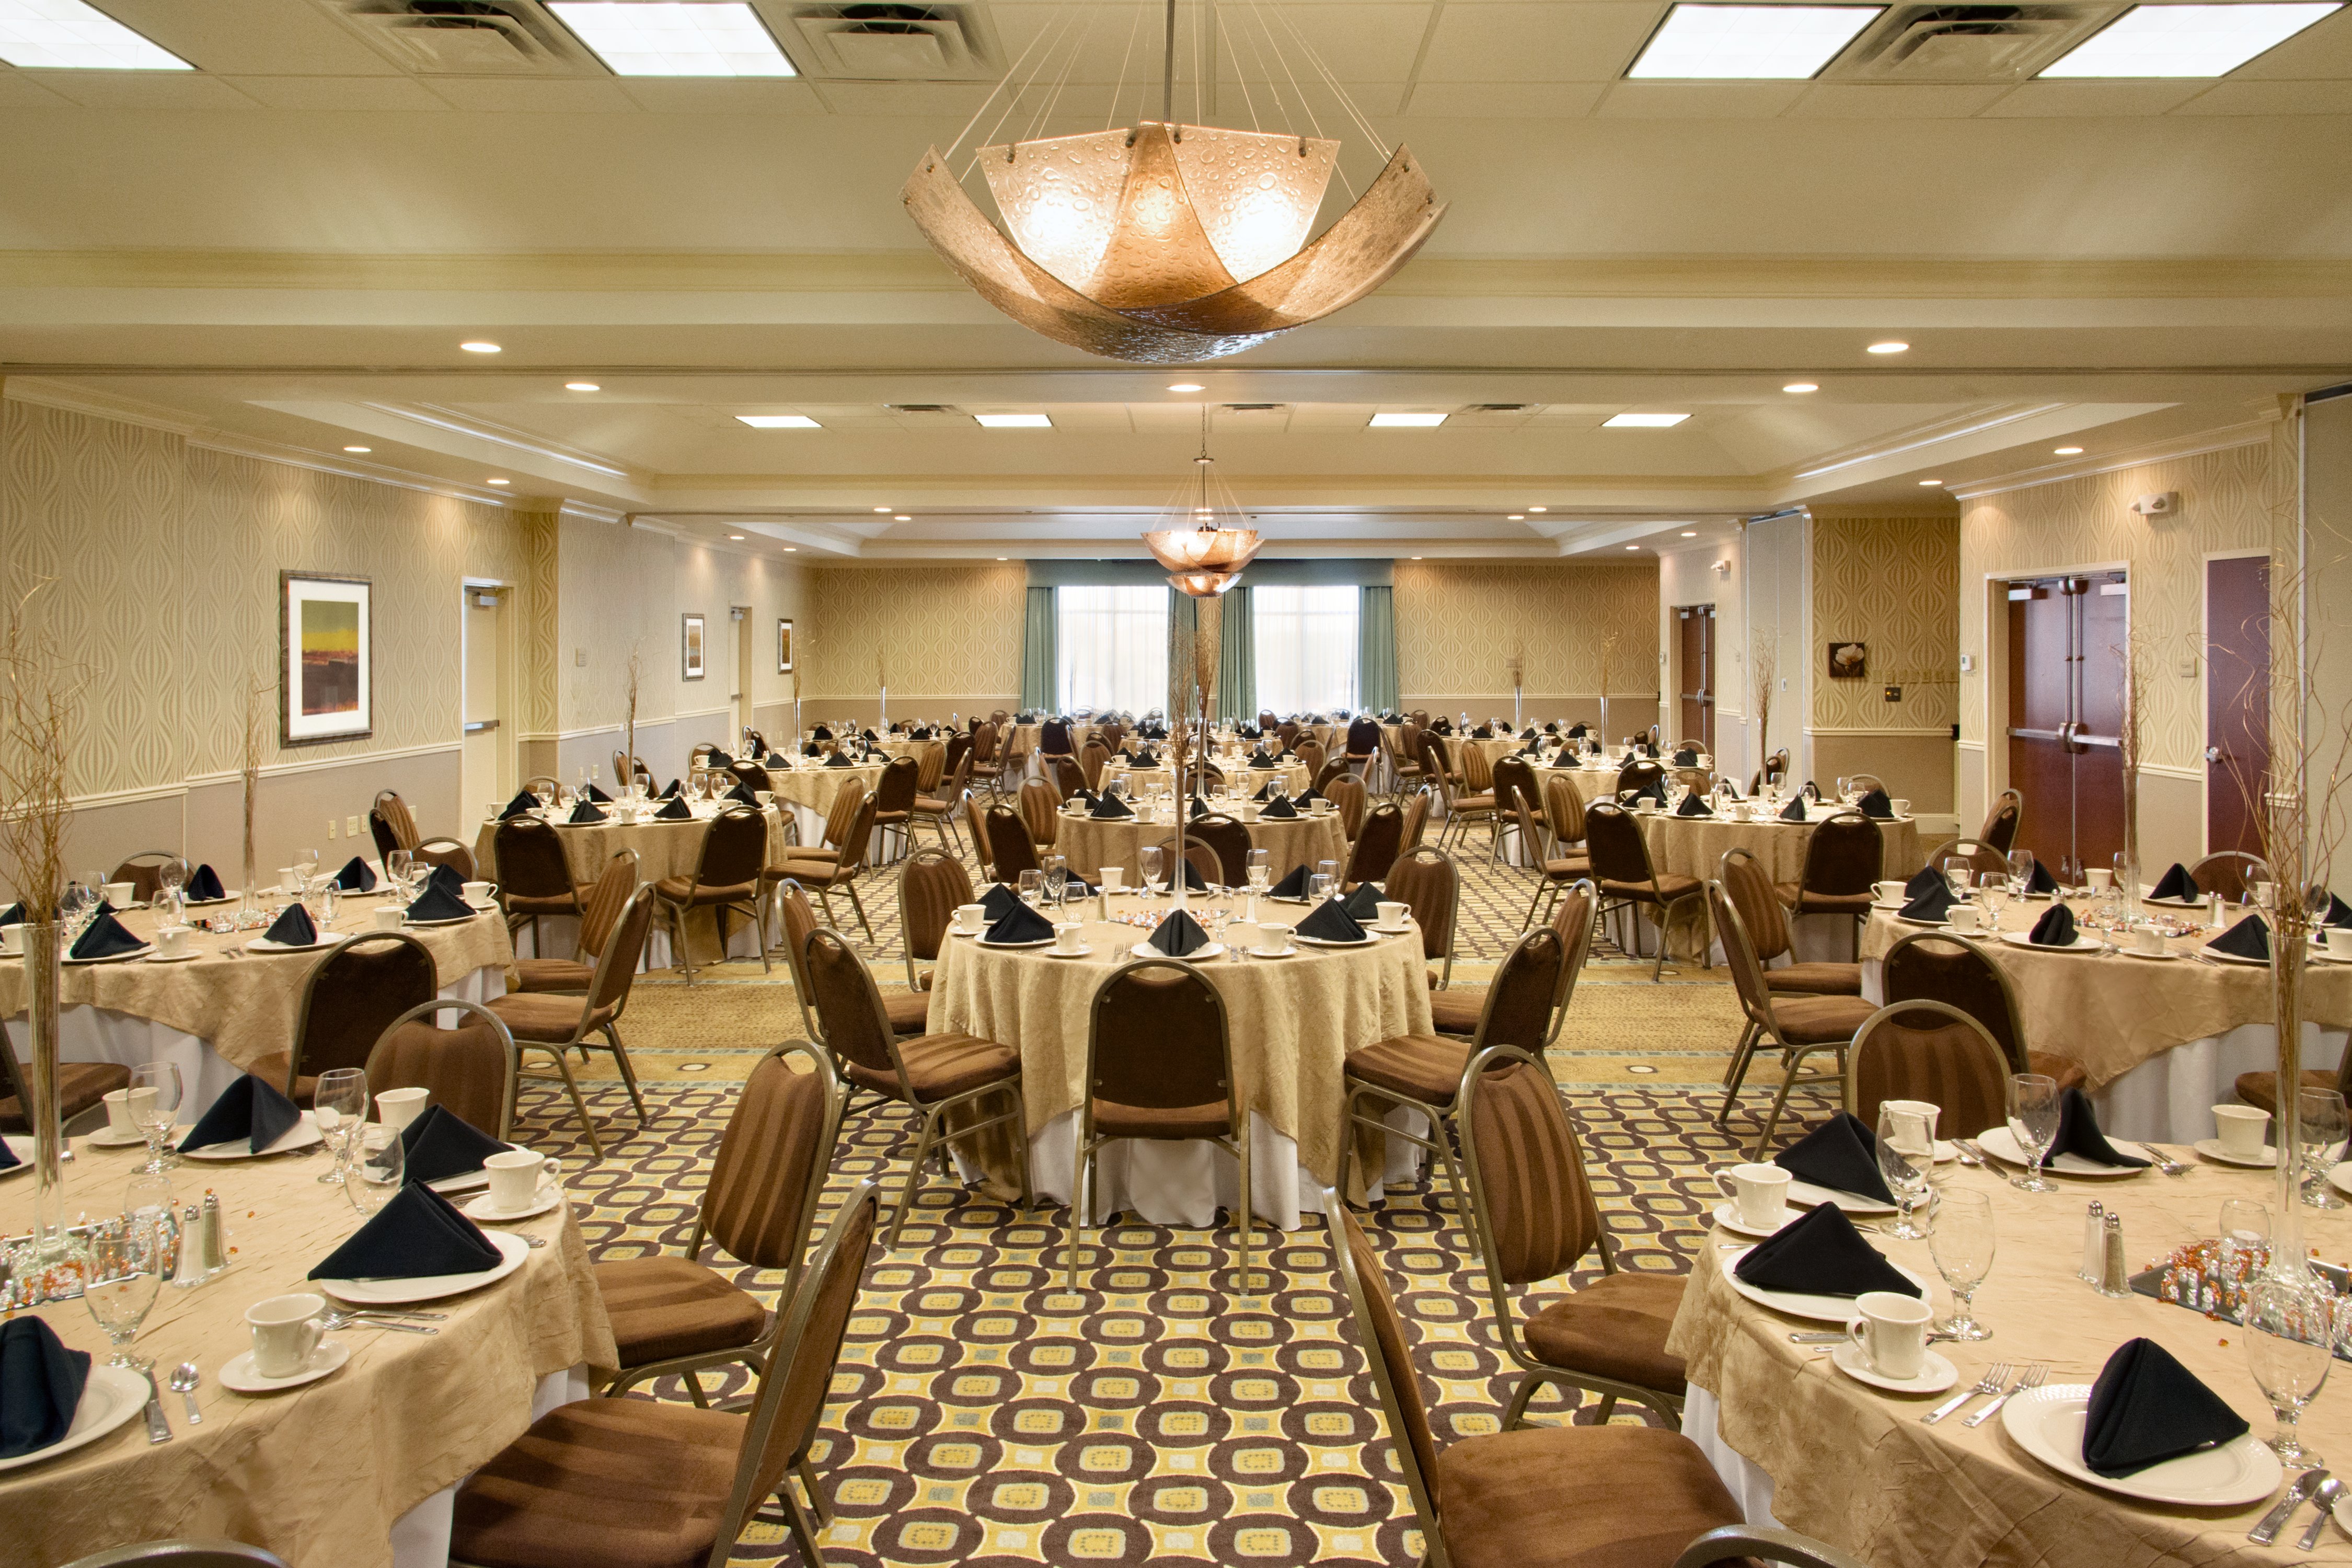 The Grand Ballroom with set tables and chairs.